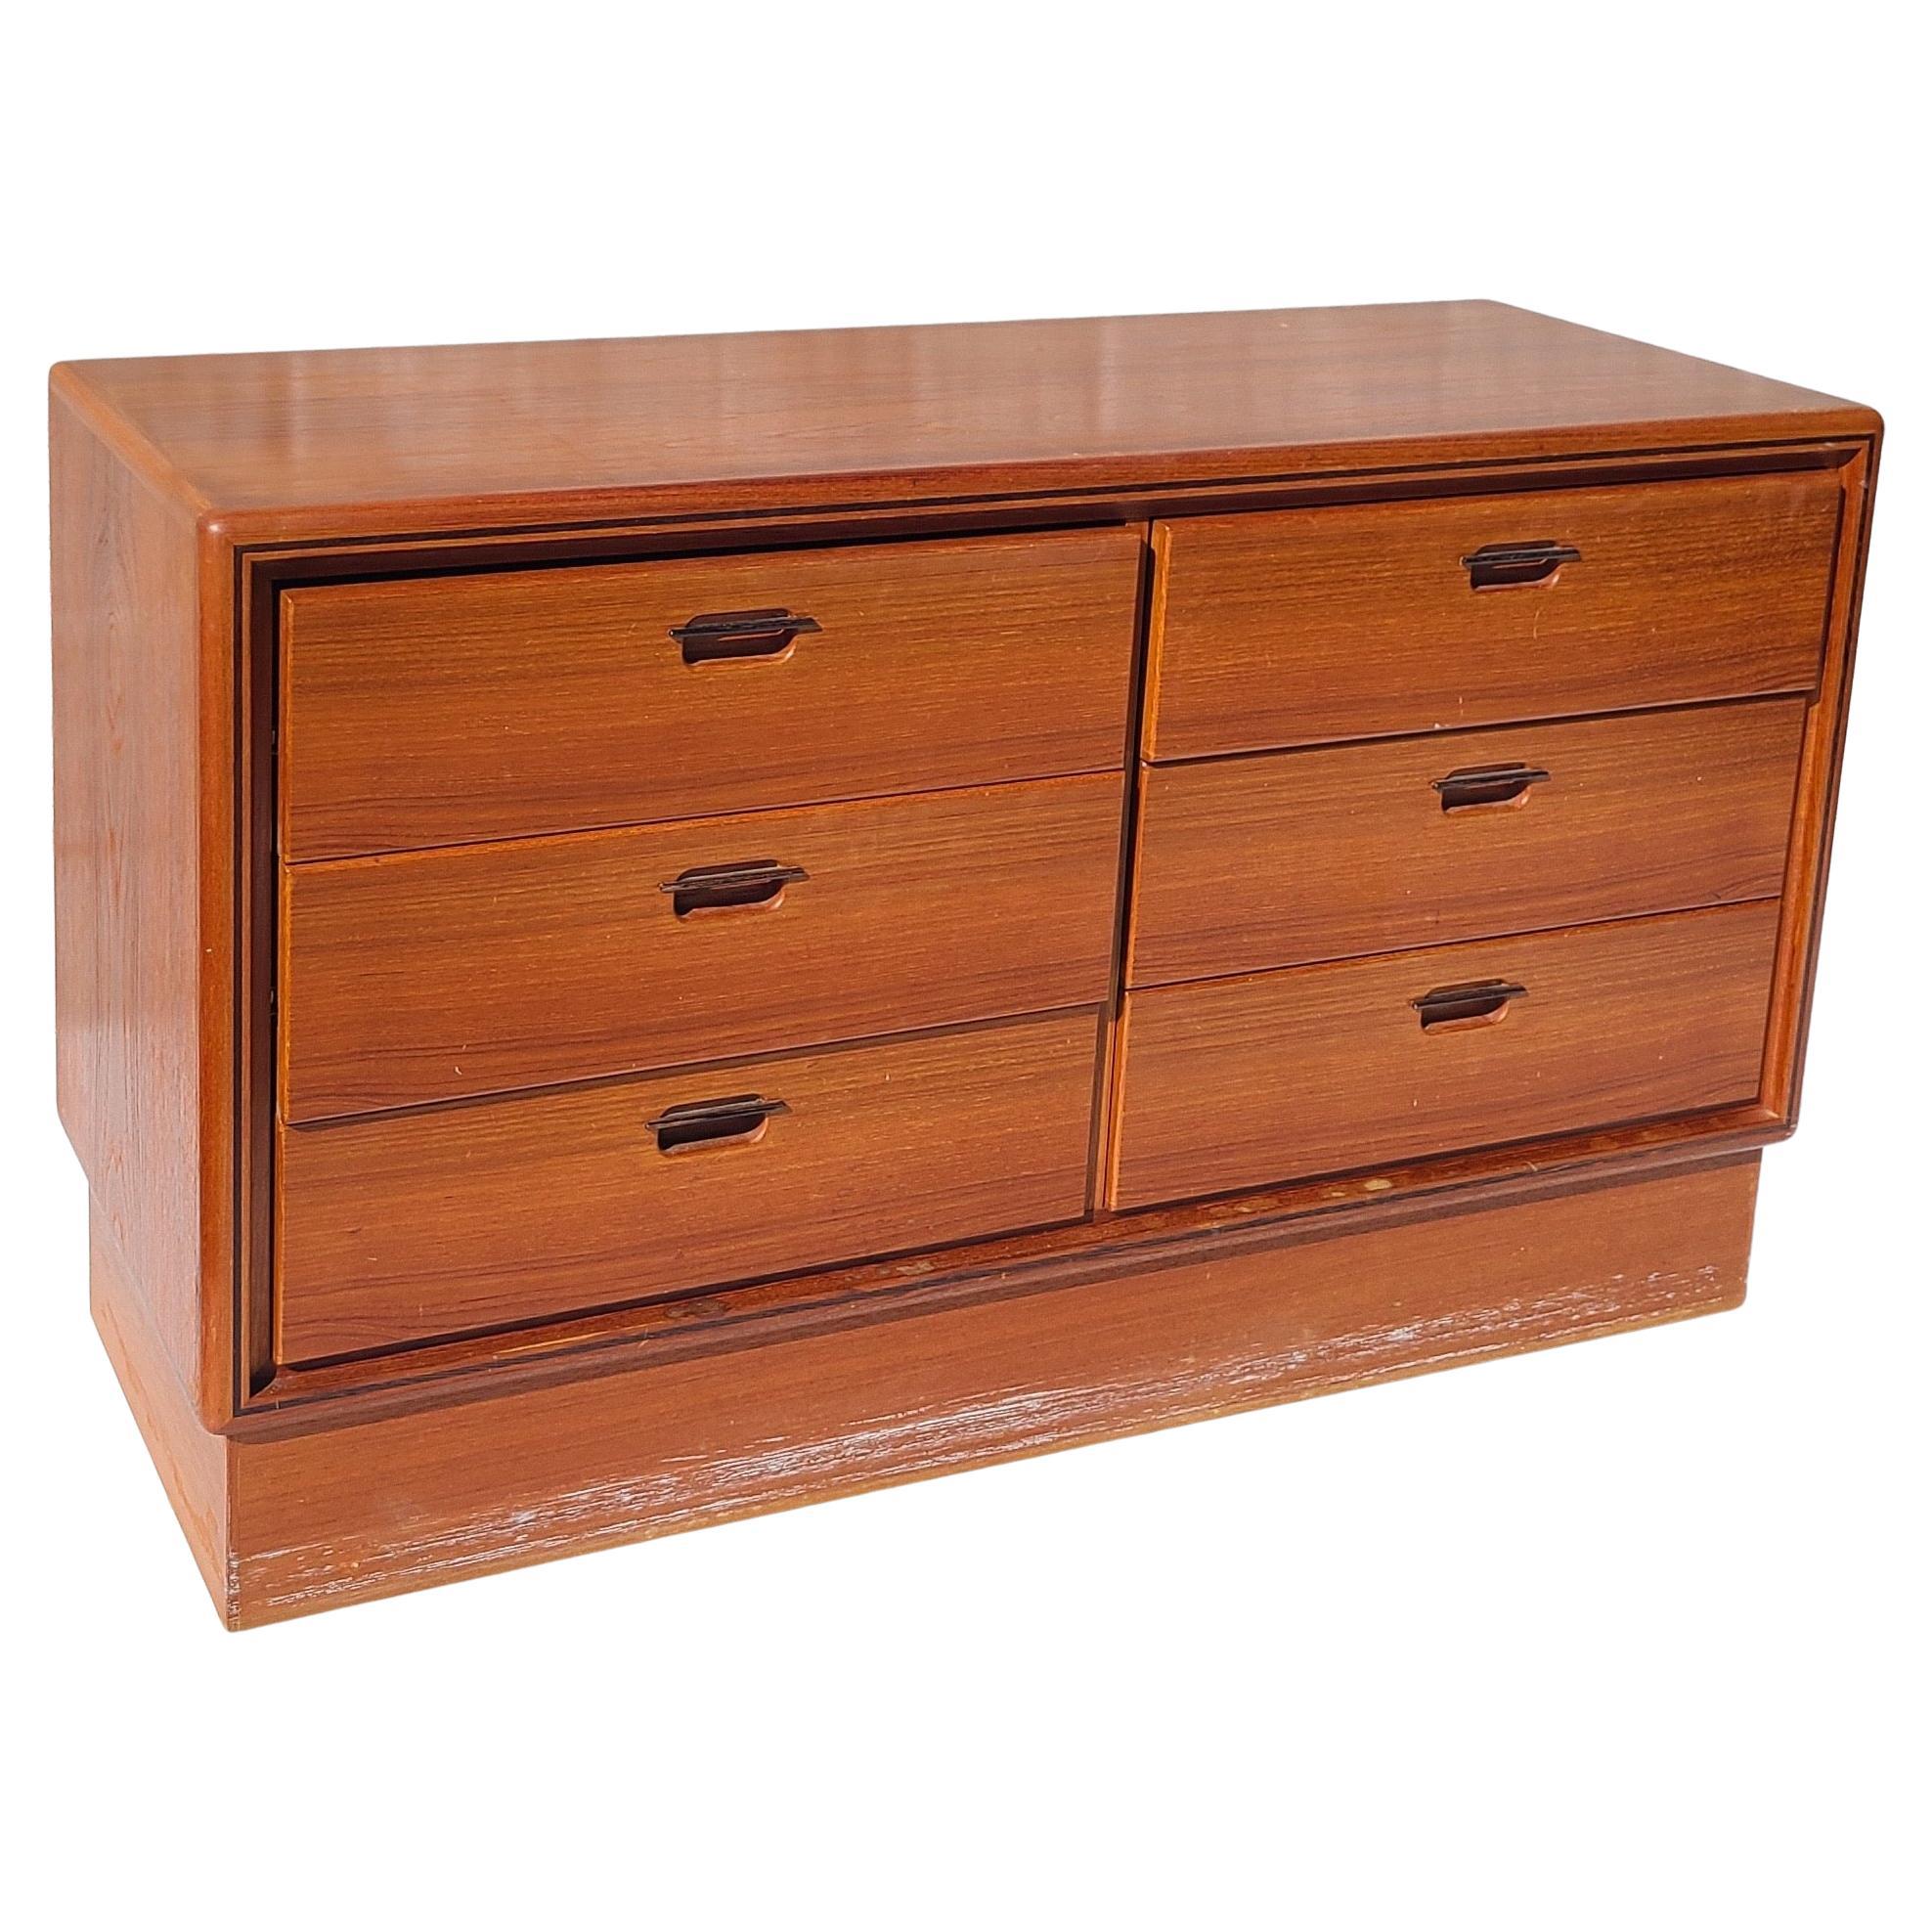 Teak 6 drawer chest with Wenge Pulls.
Made in Denmark by EMC furniture.


 